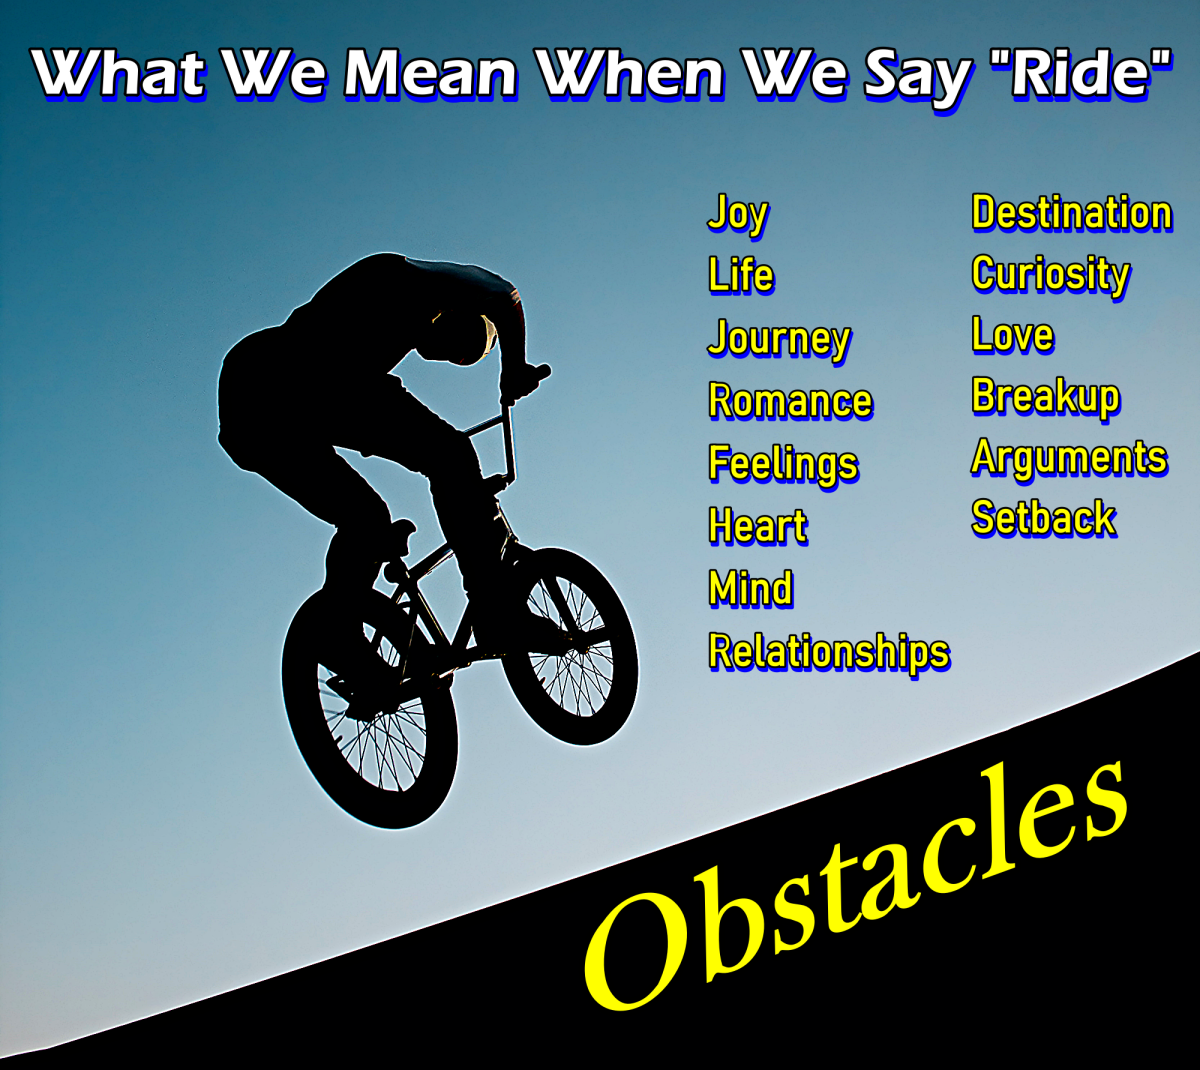 What we mean when we say "ride."